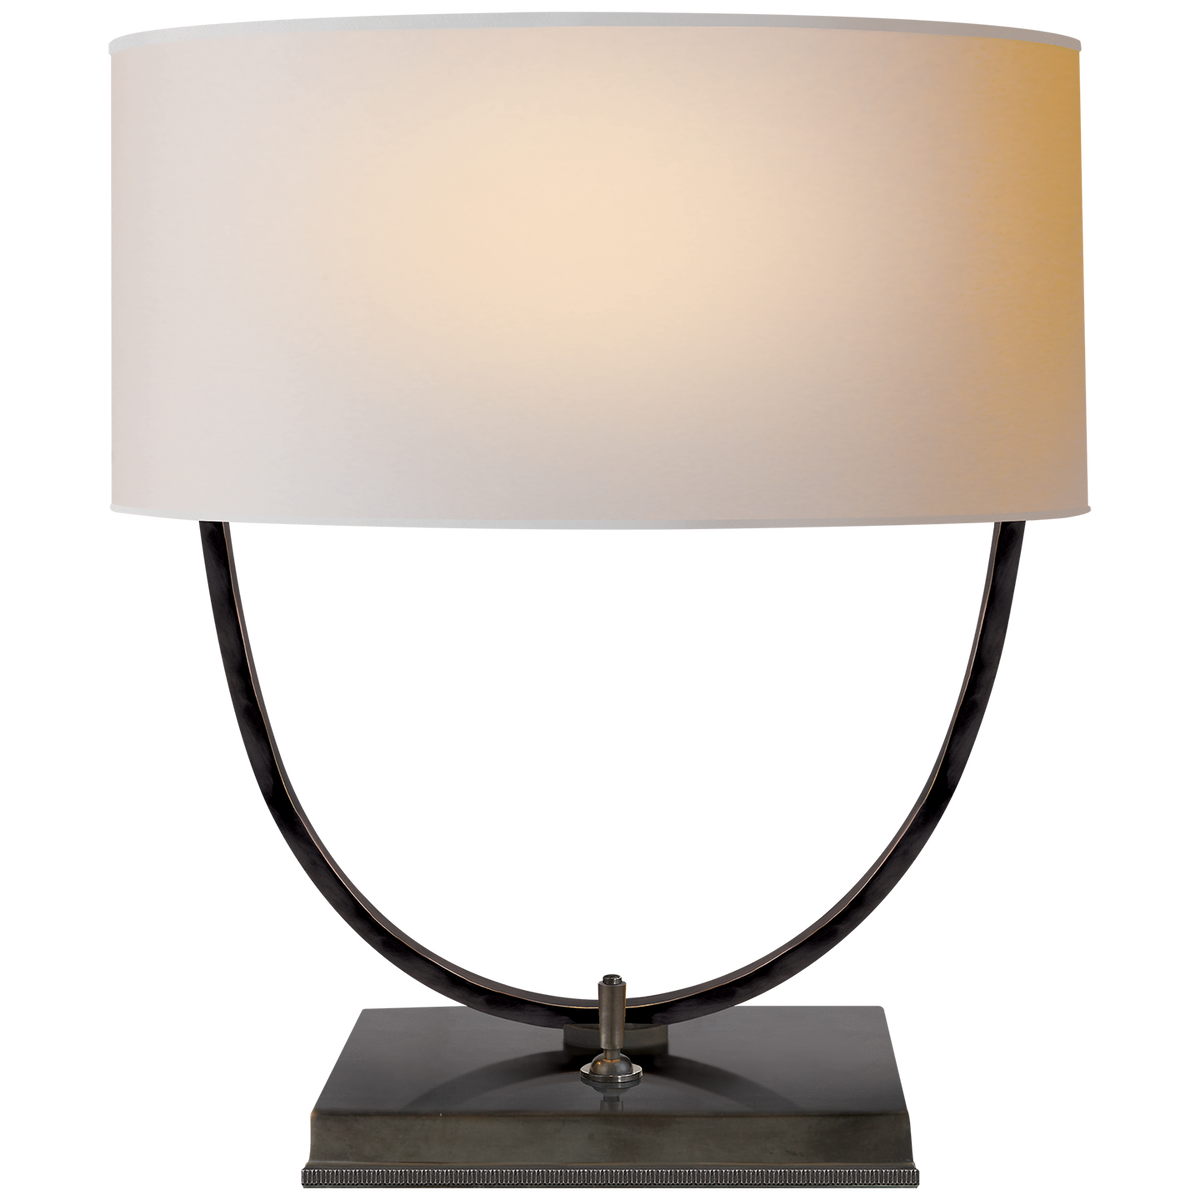 Visual Comfort Signature | TOB 3197HAB | Henley Collection | Brass -  Antique | One Light Task Lamp